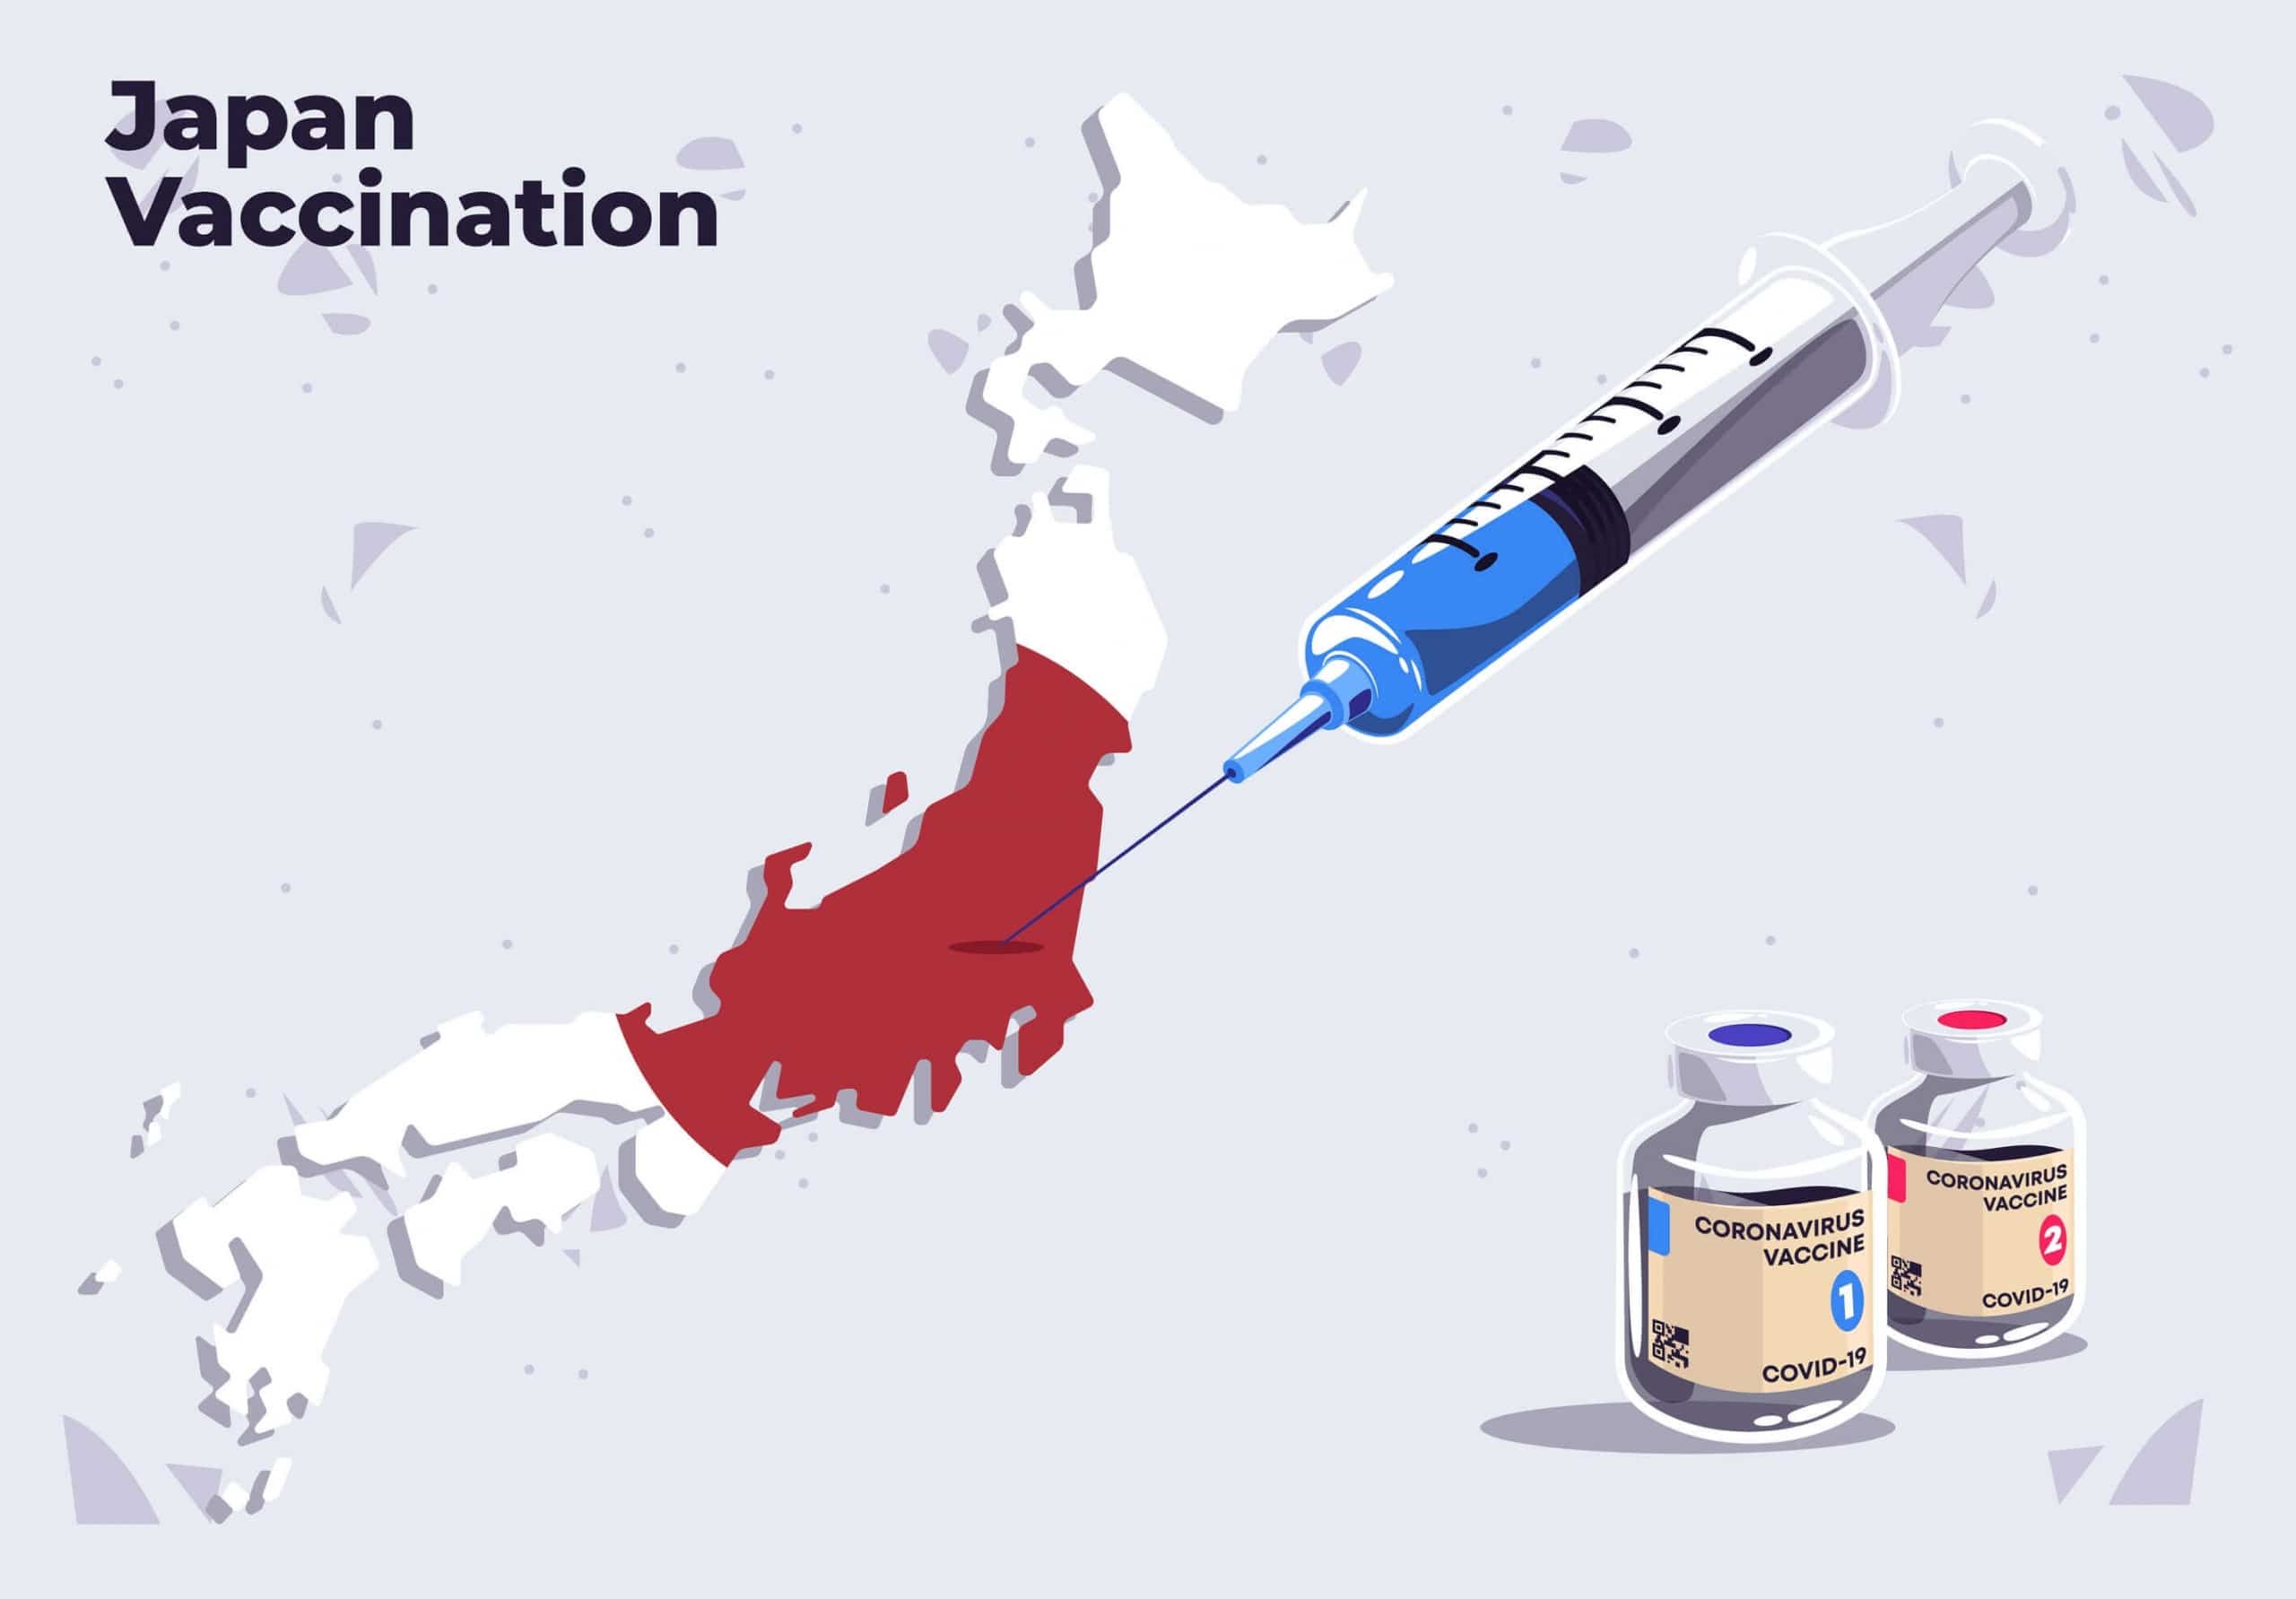 Vaccinations side will be more concentrated by Japanese Government